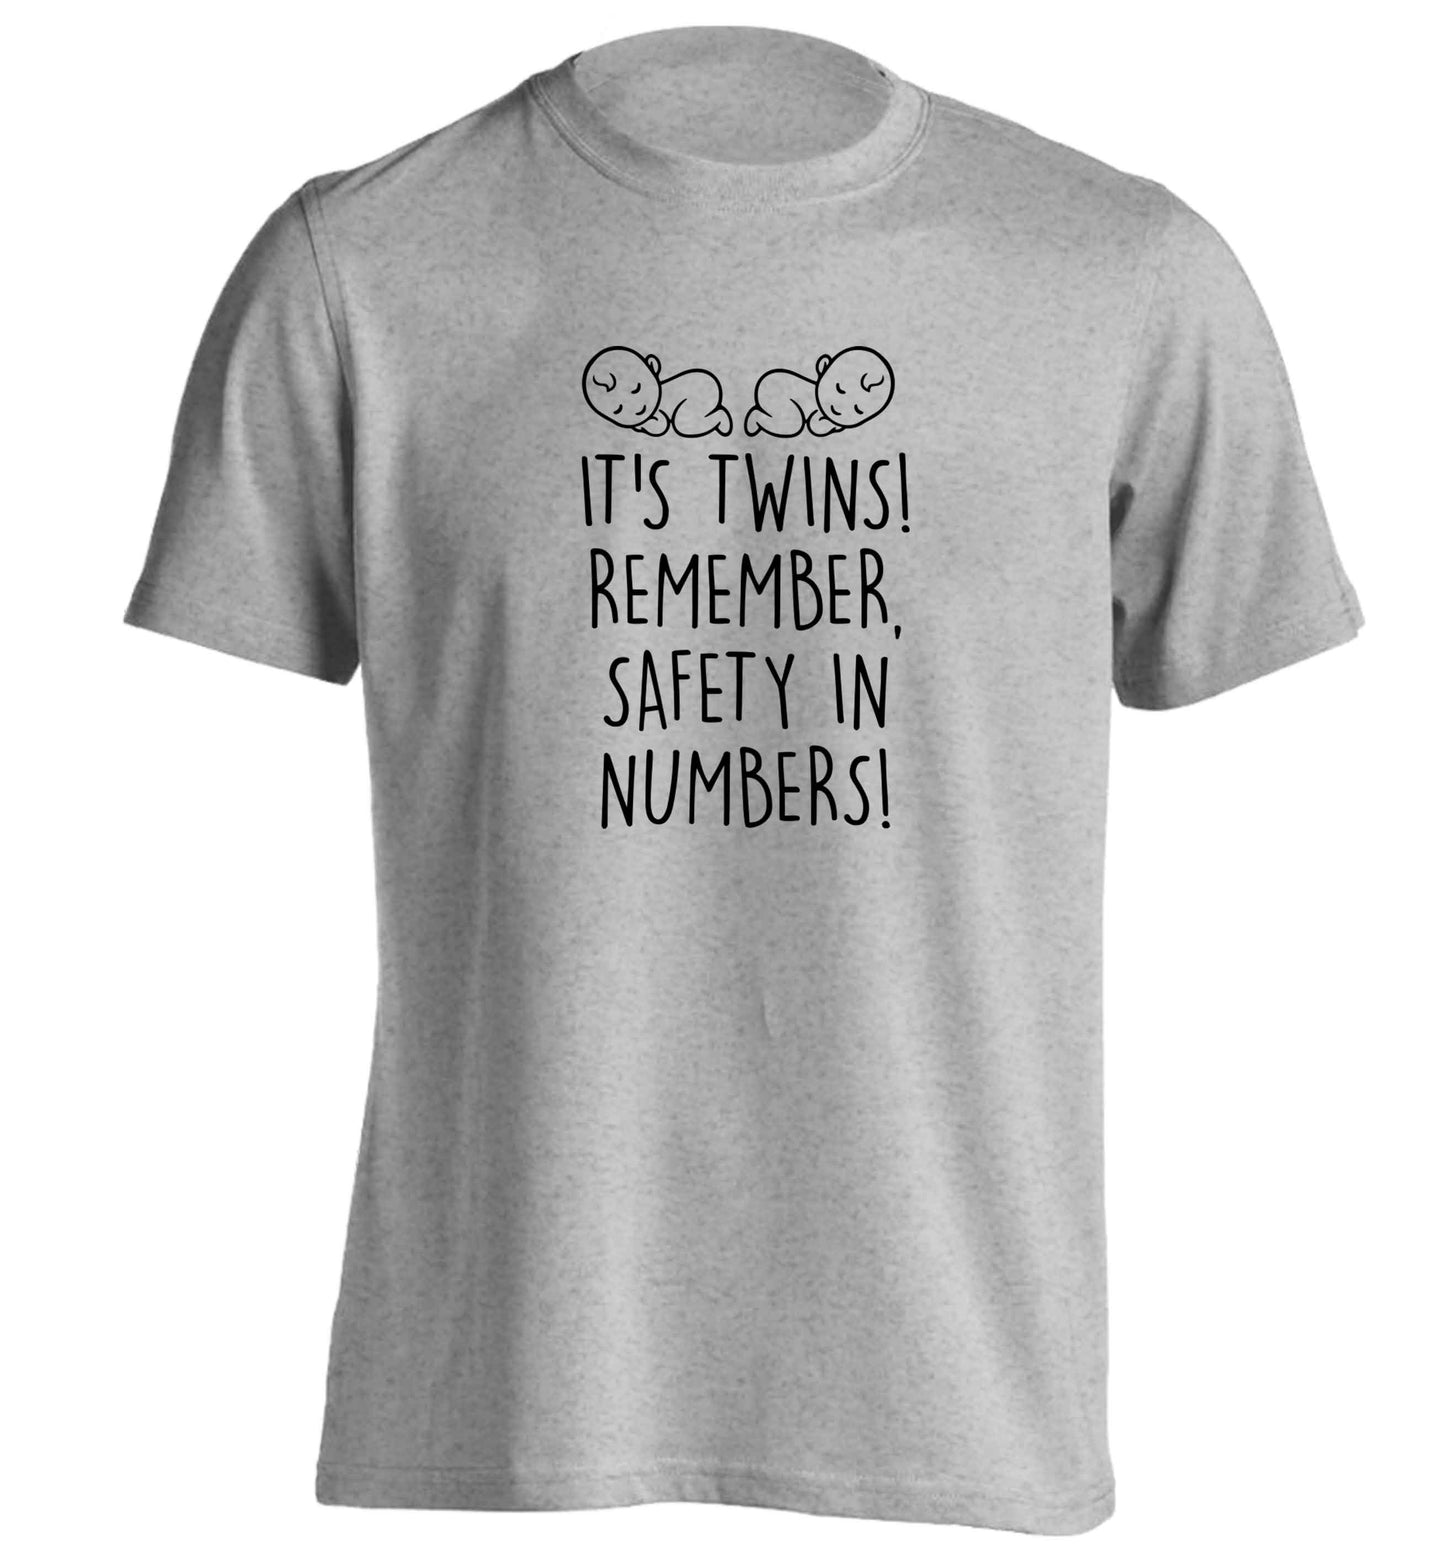 It's twins! Remember safety in numbers! adults unisex grey Tshirt 2XL